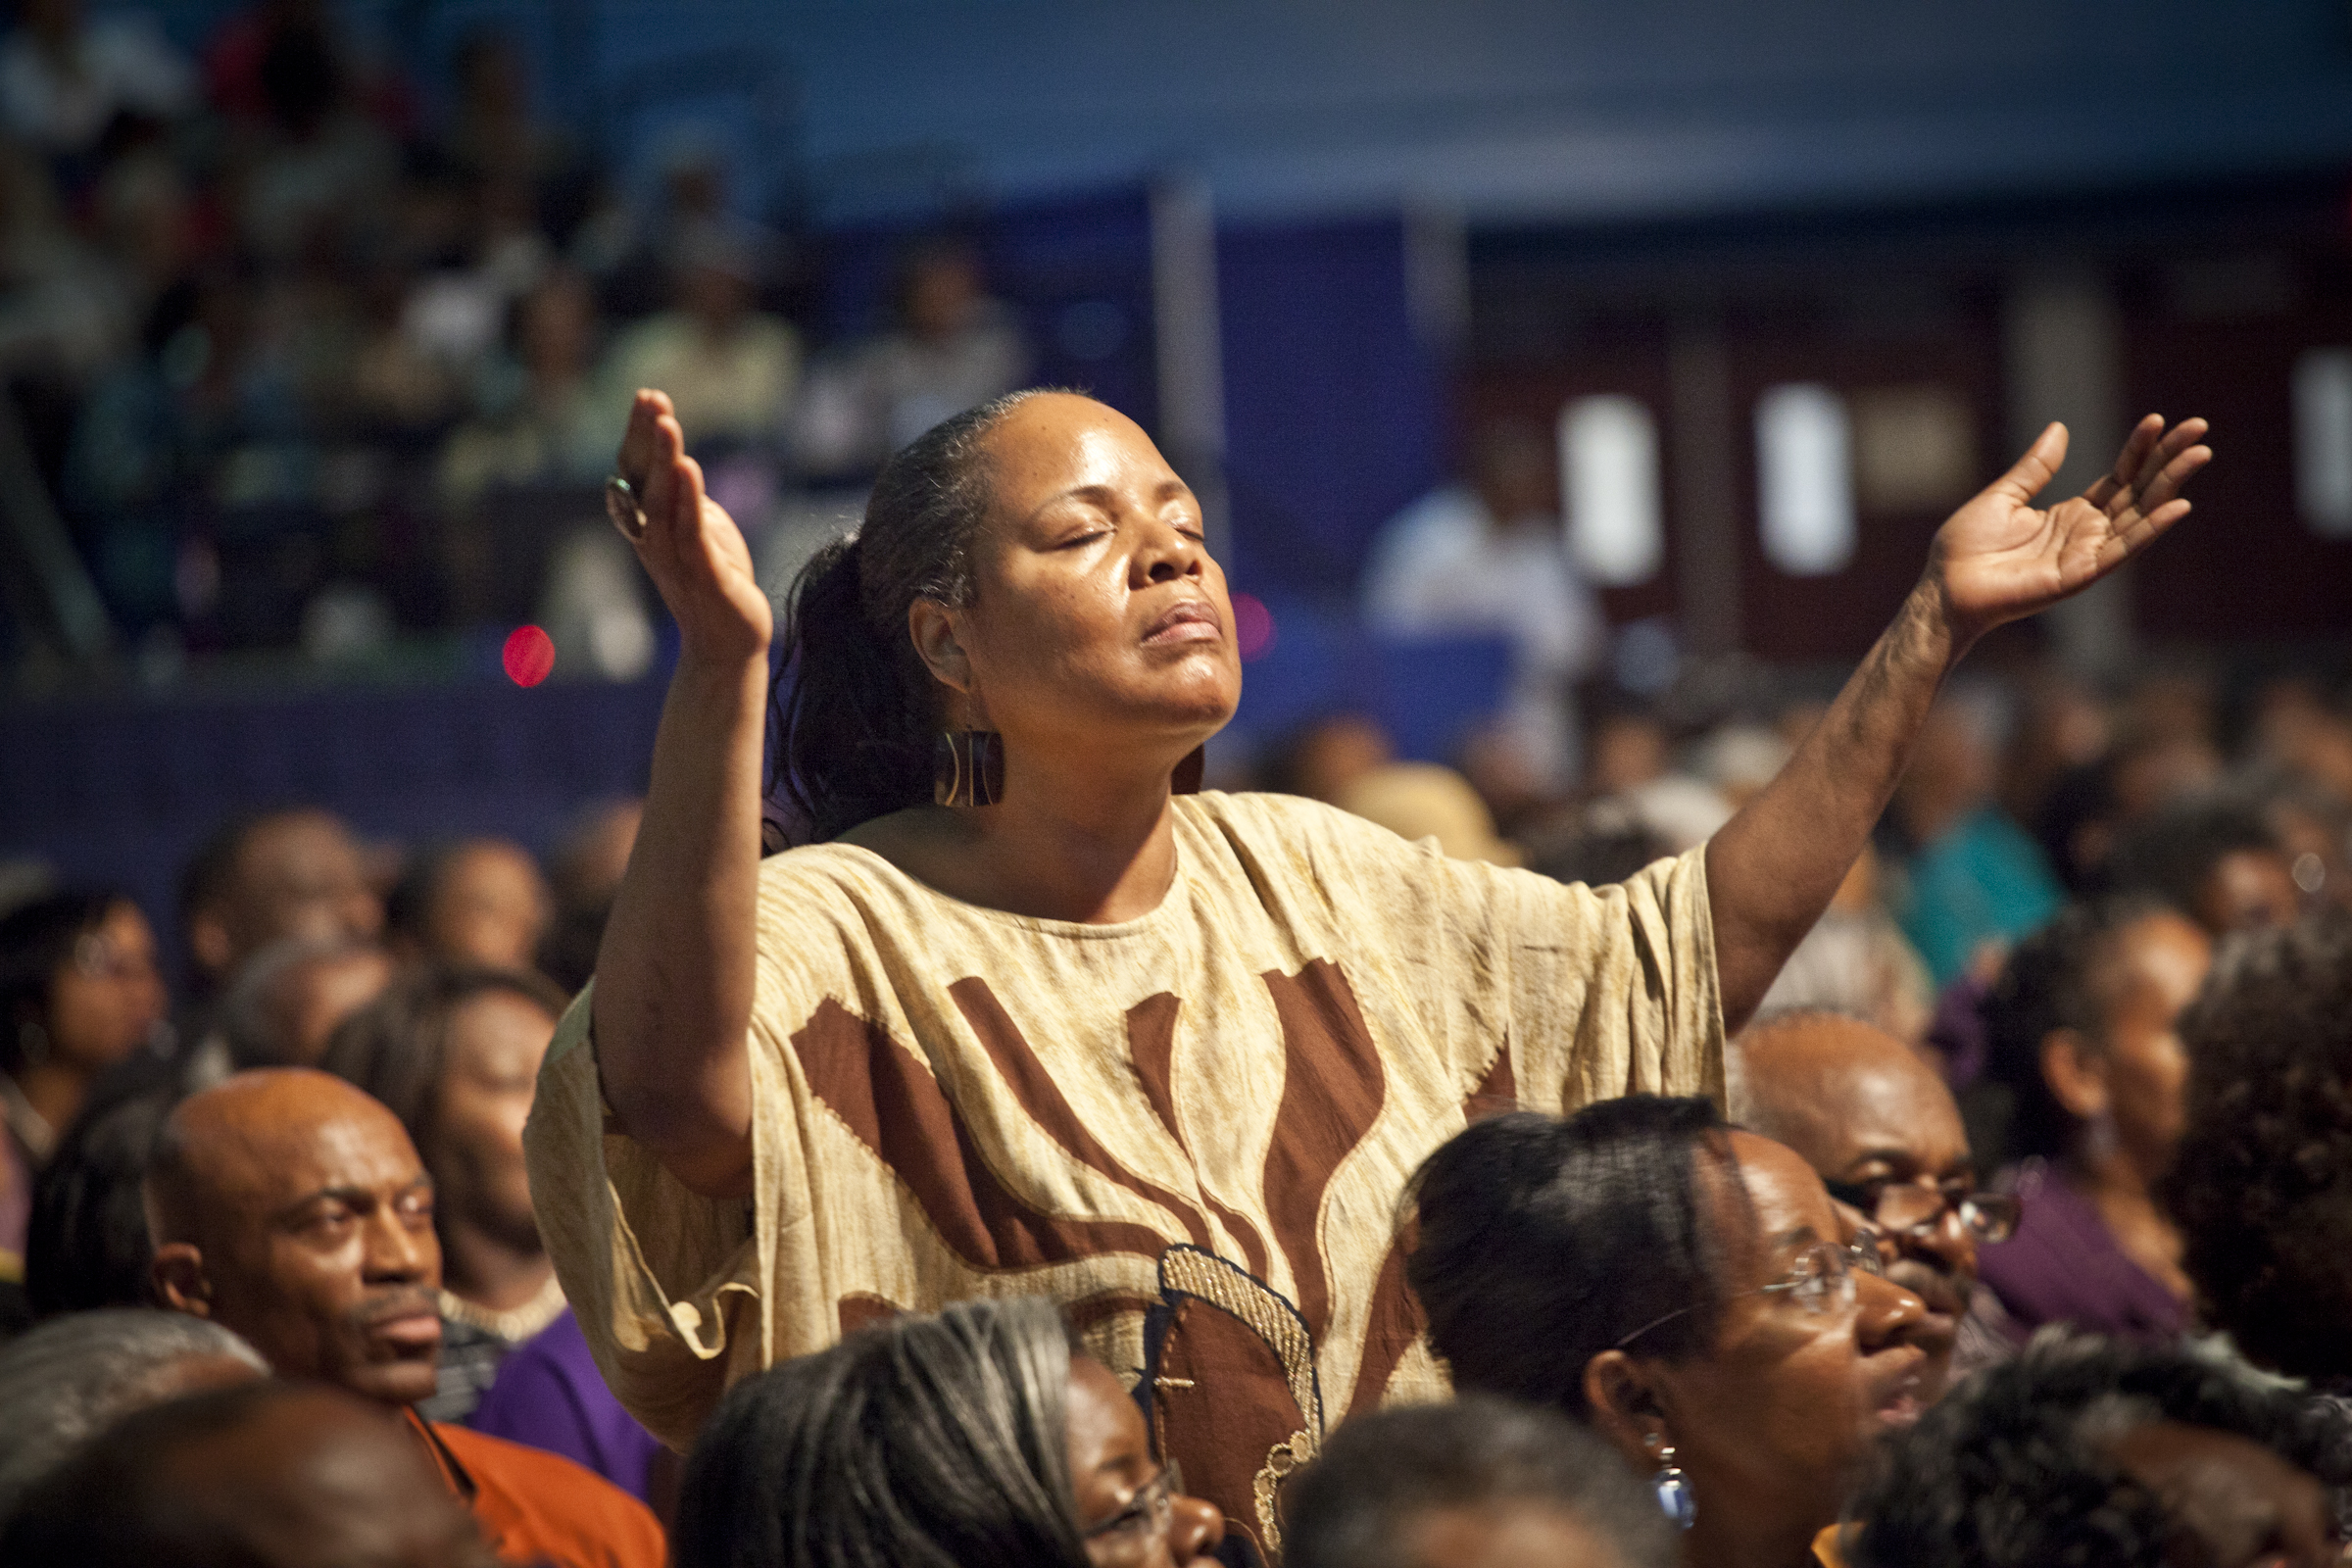 Woman with hands raised in praise | The DART Collective